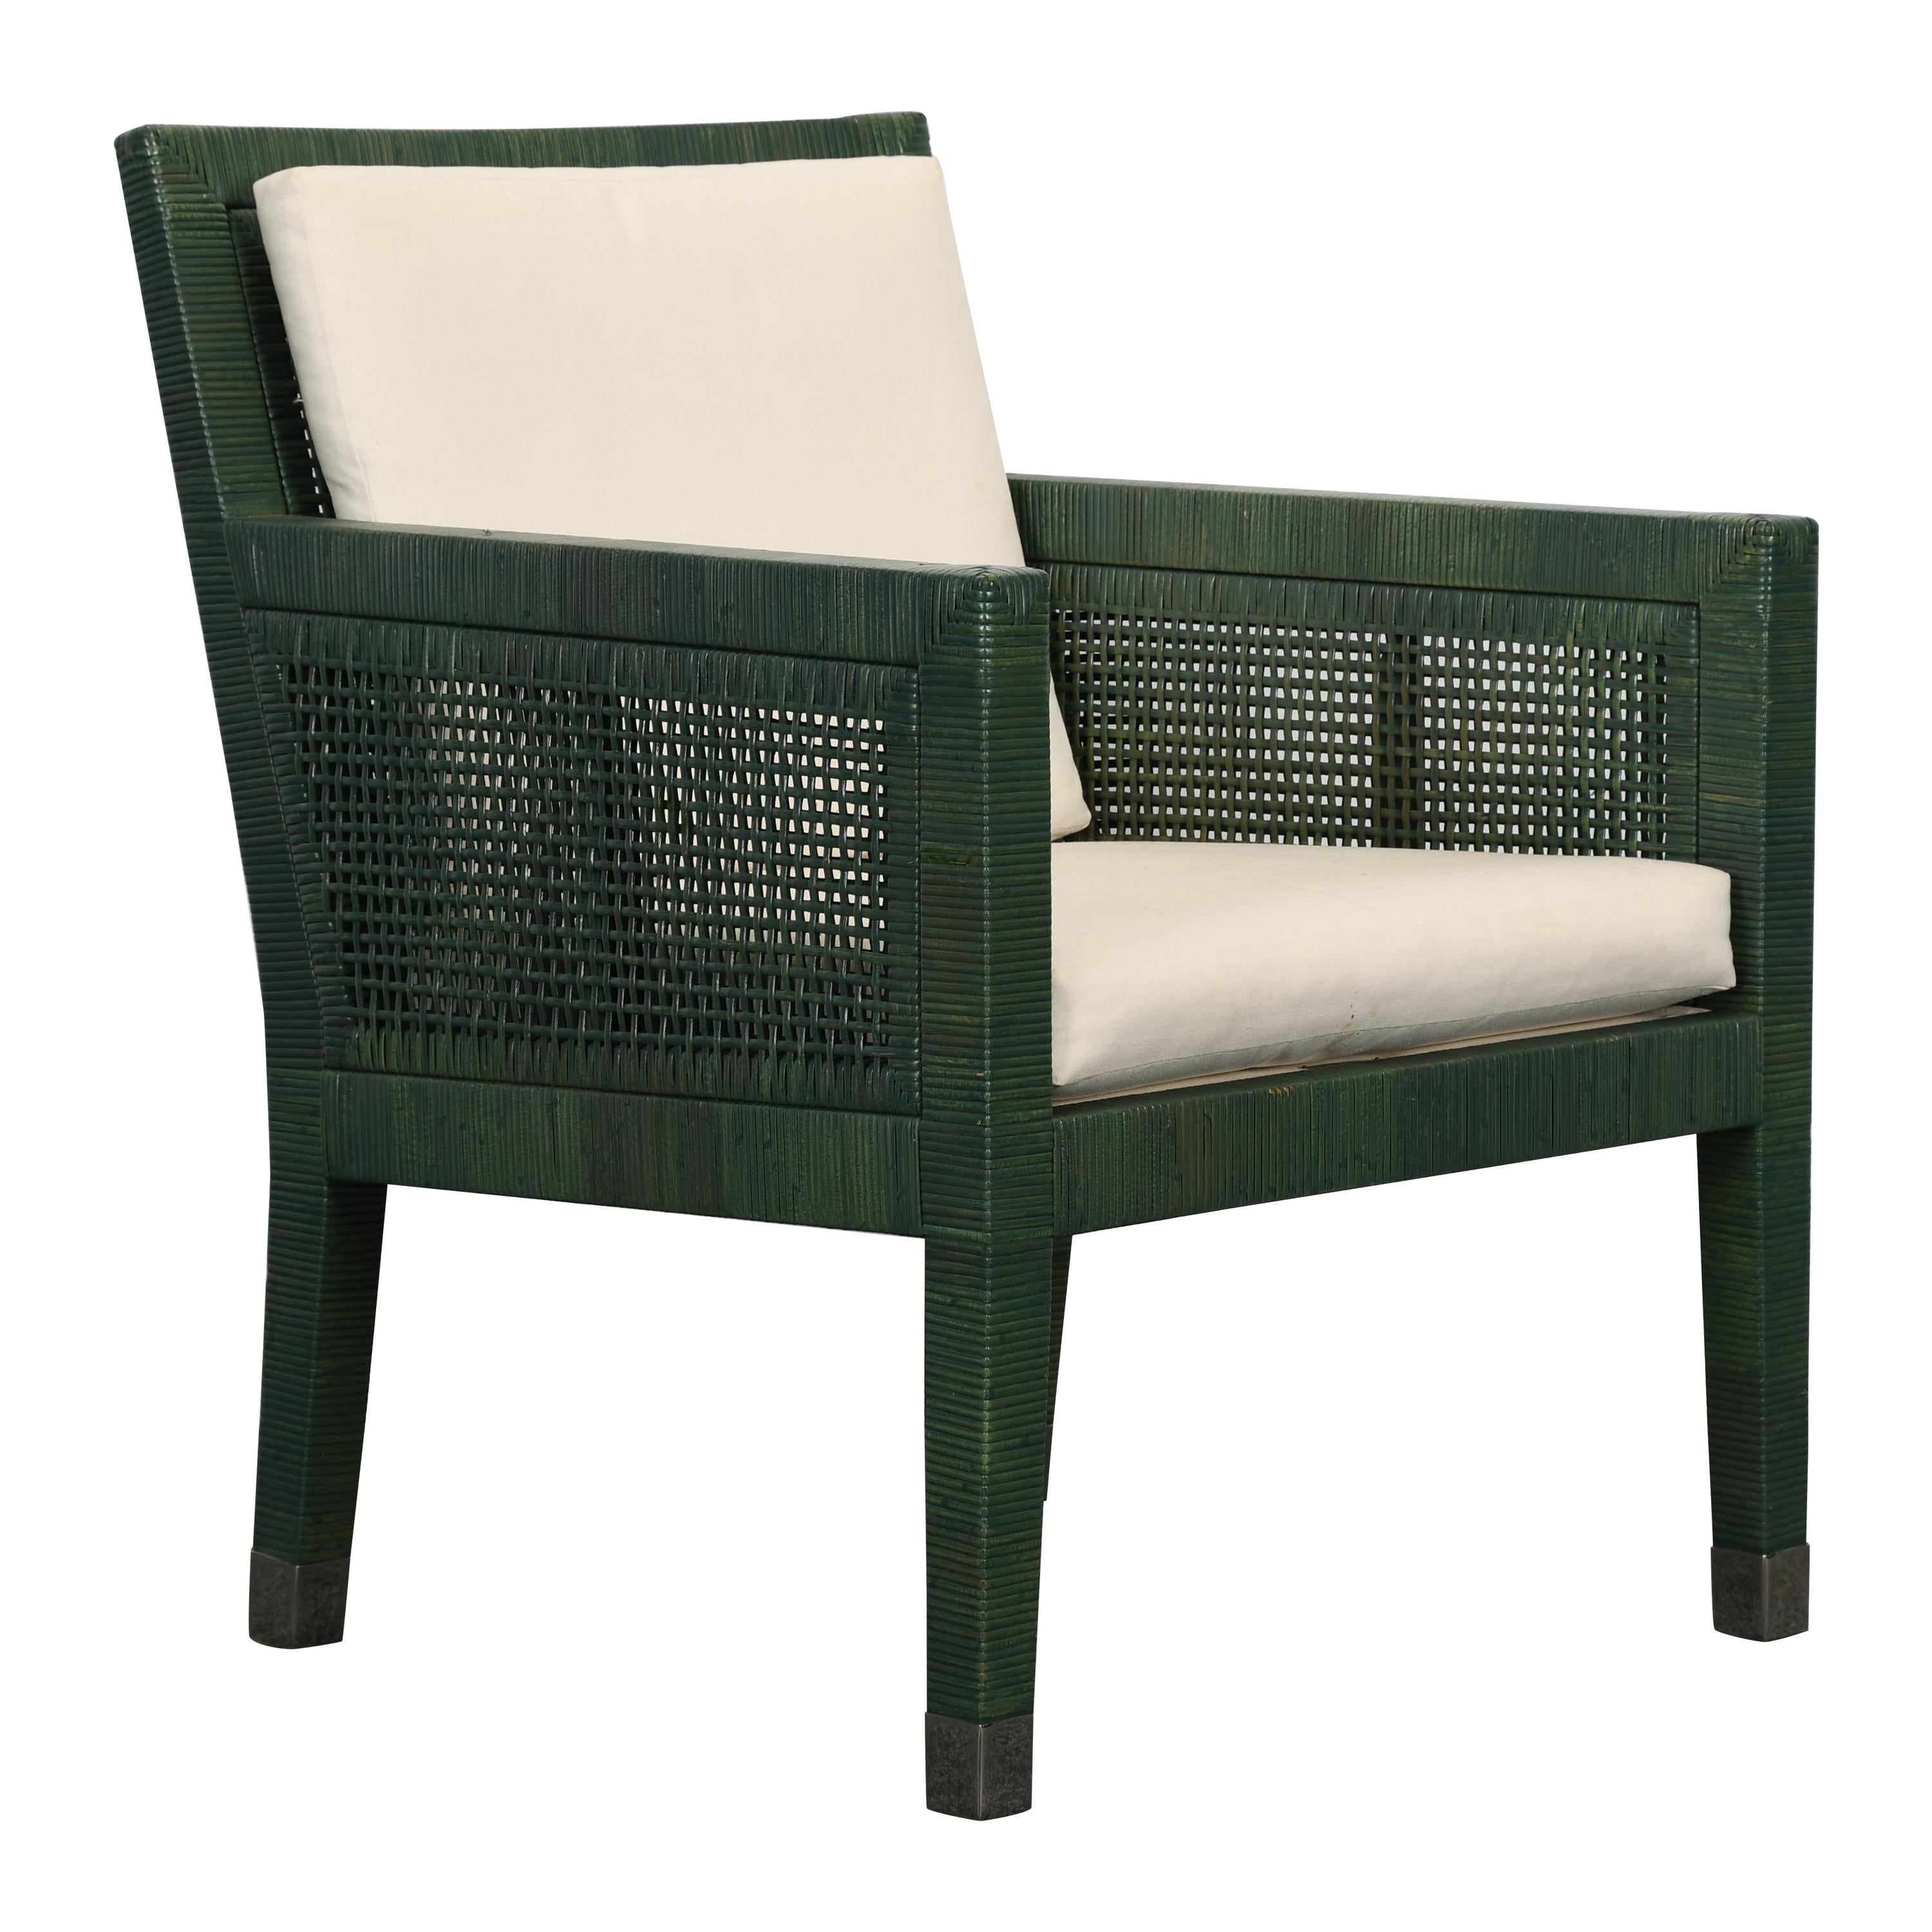 Bielecky Brothers Rattan and Stainless Steel Armchair, 1980s